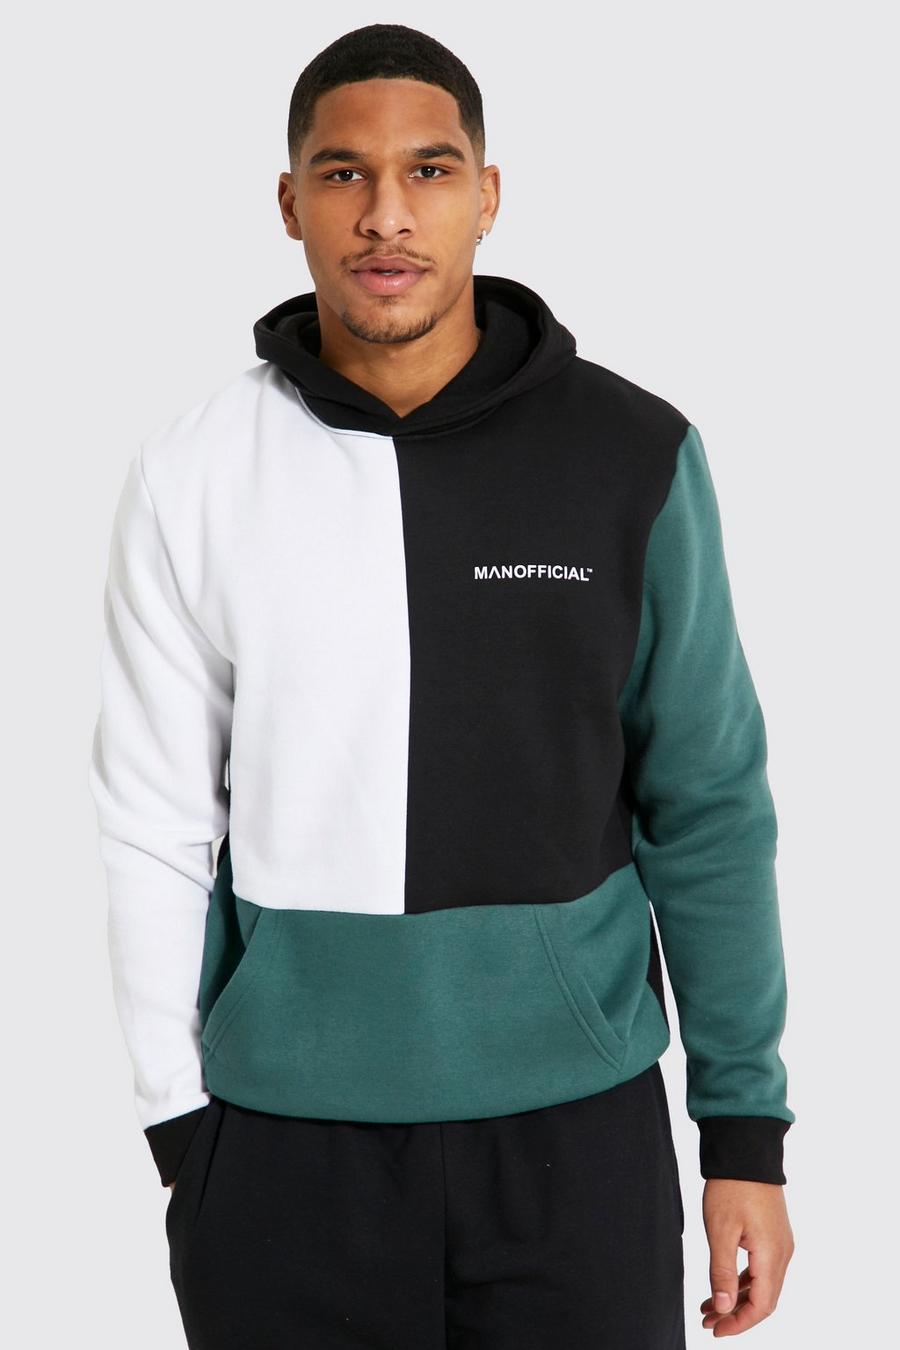 Forest Tall Man Official Multi Colour Block Hoodie image number 1